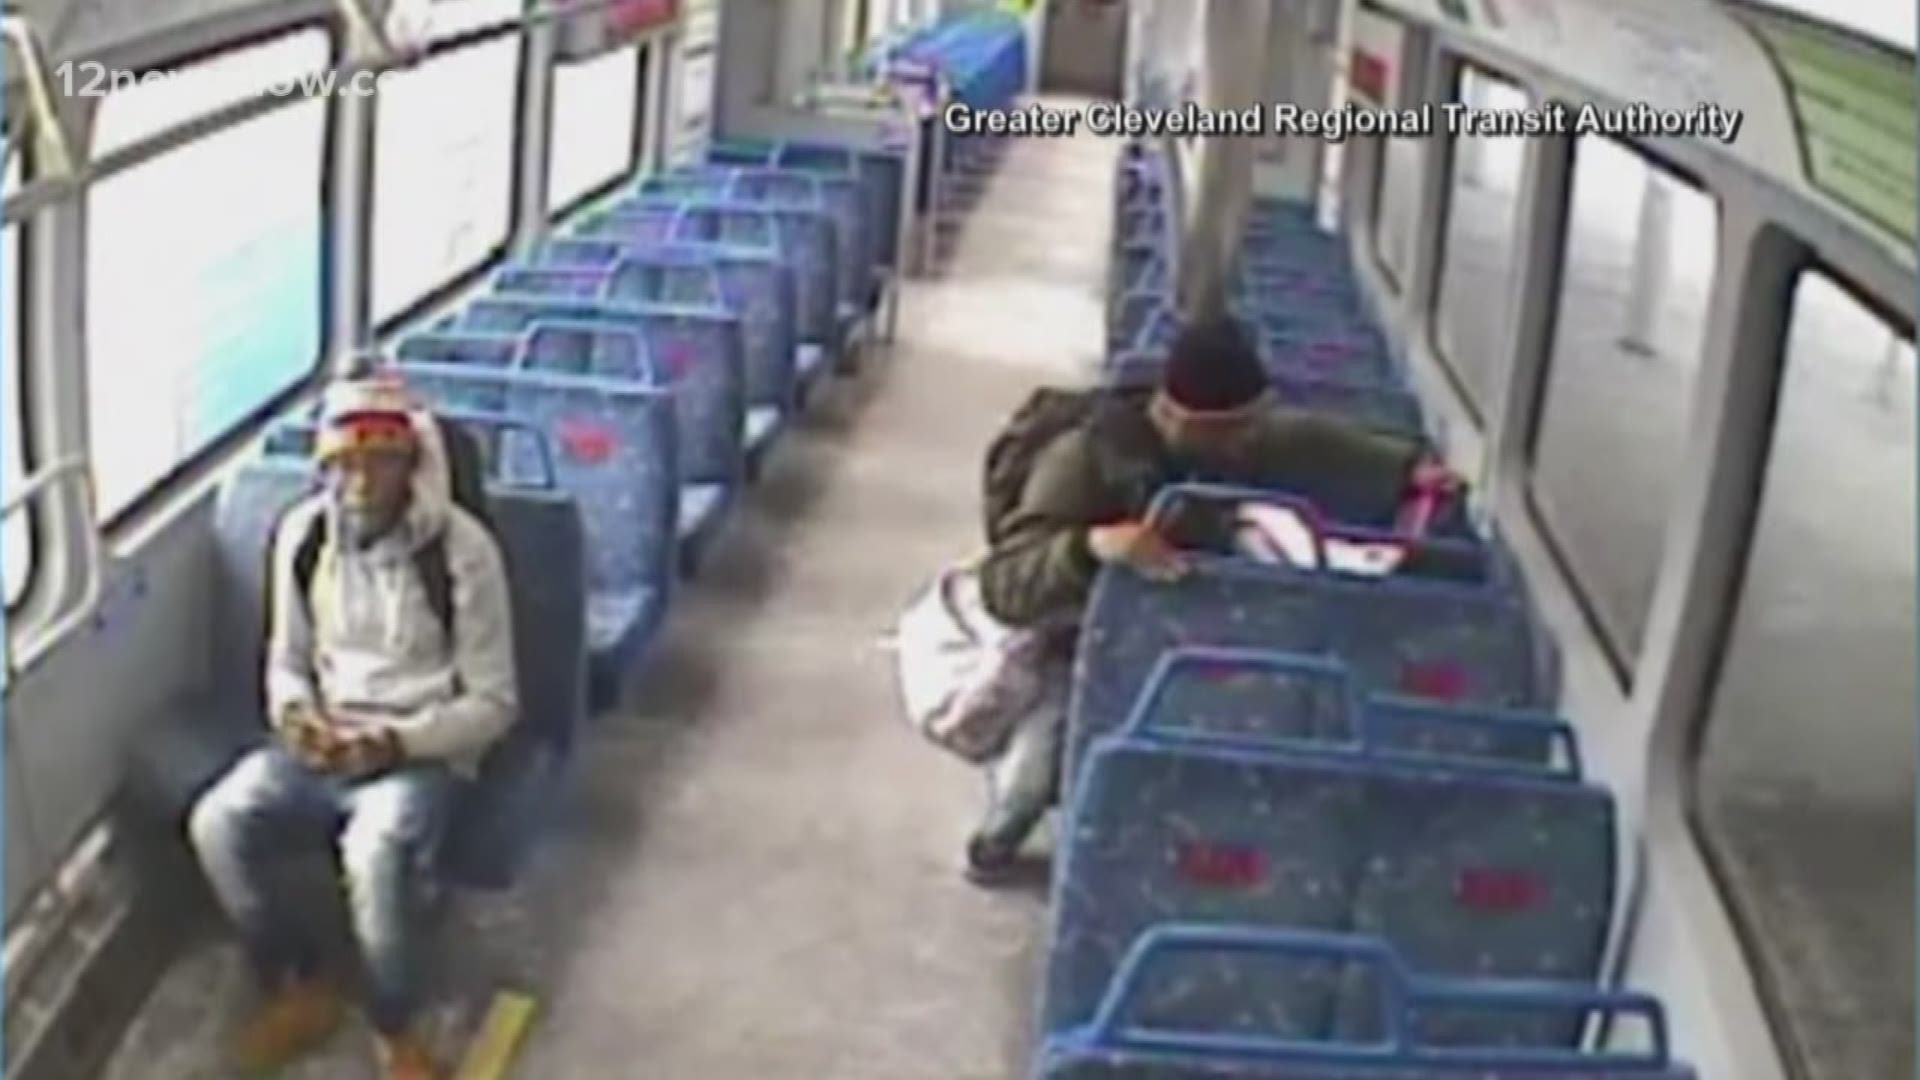 Video shows man leave baby on train during smoke break